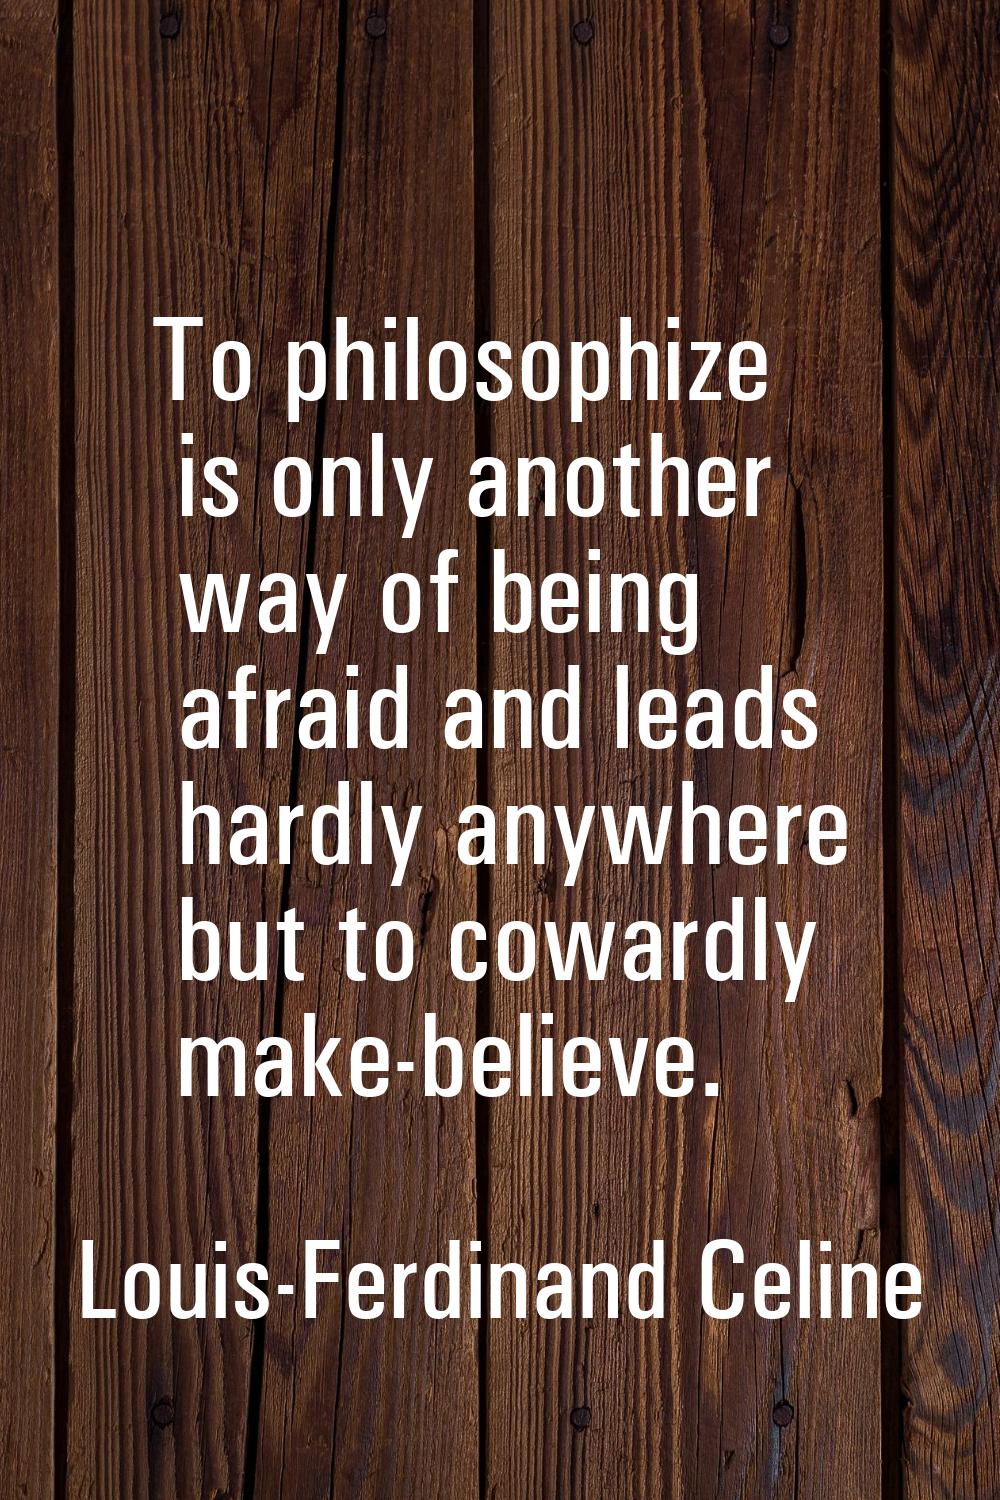 To philosophize is only another way of being afraid and leads hardly anywhere but to cowardly make-